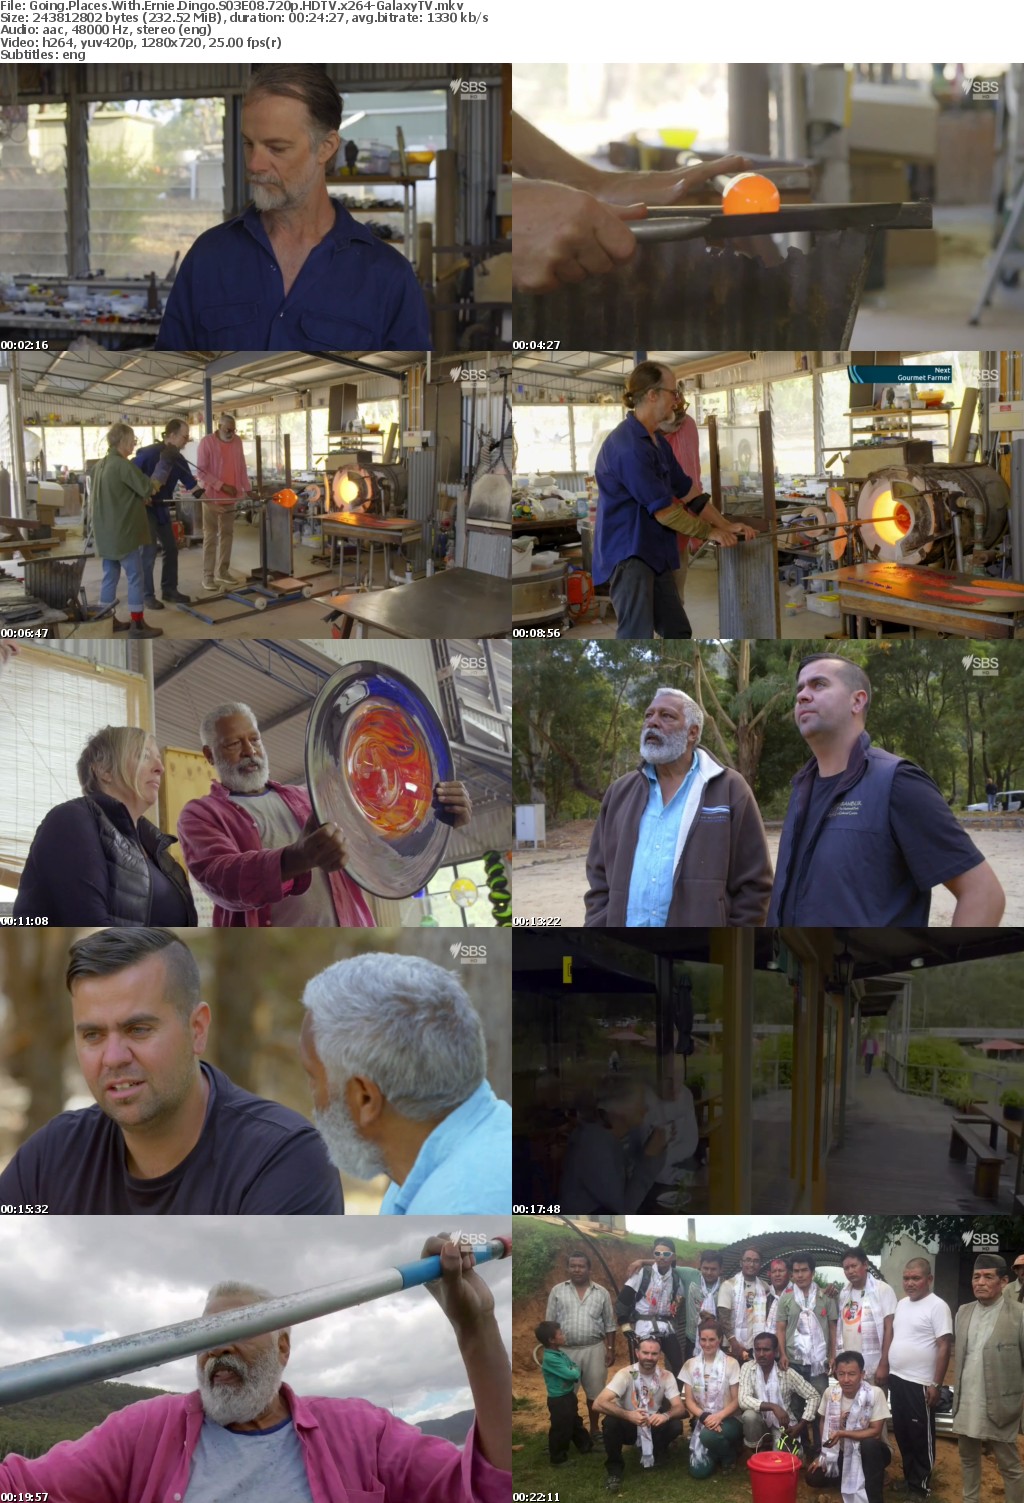 Going Places With Ernie Dingo S03 COMPLETE 720p HDTV x264-GalaxyTV